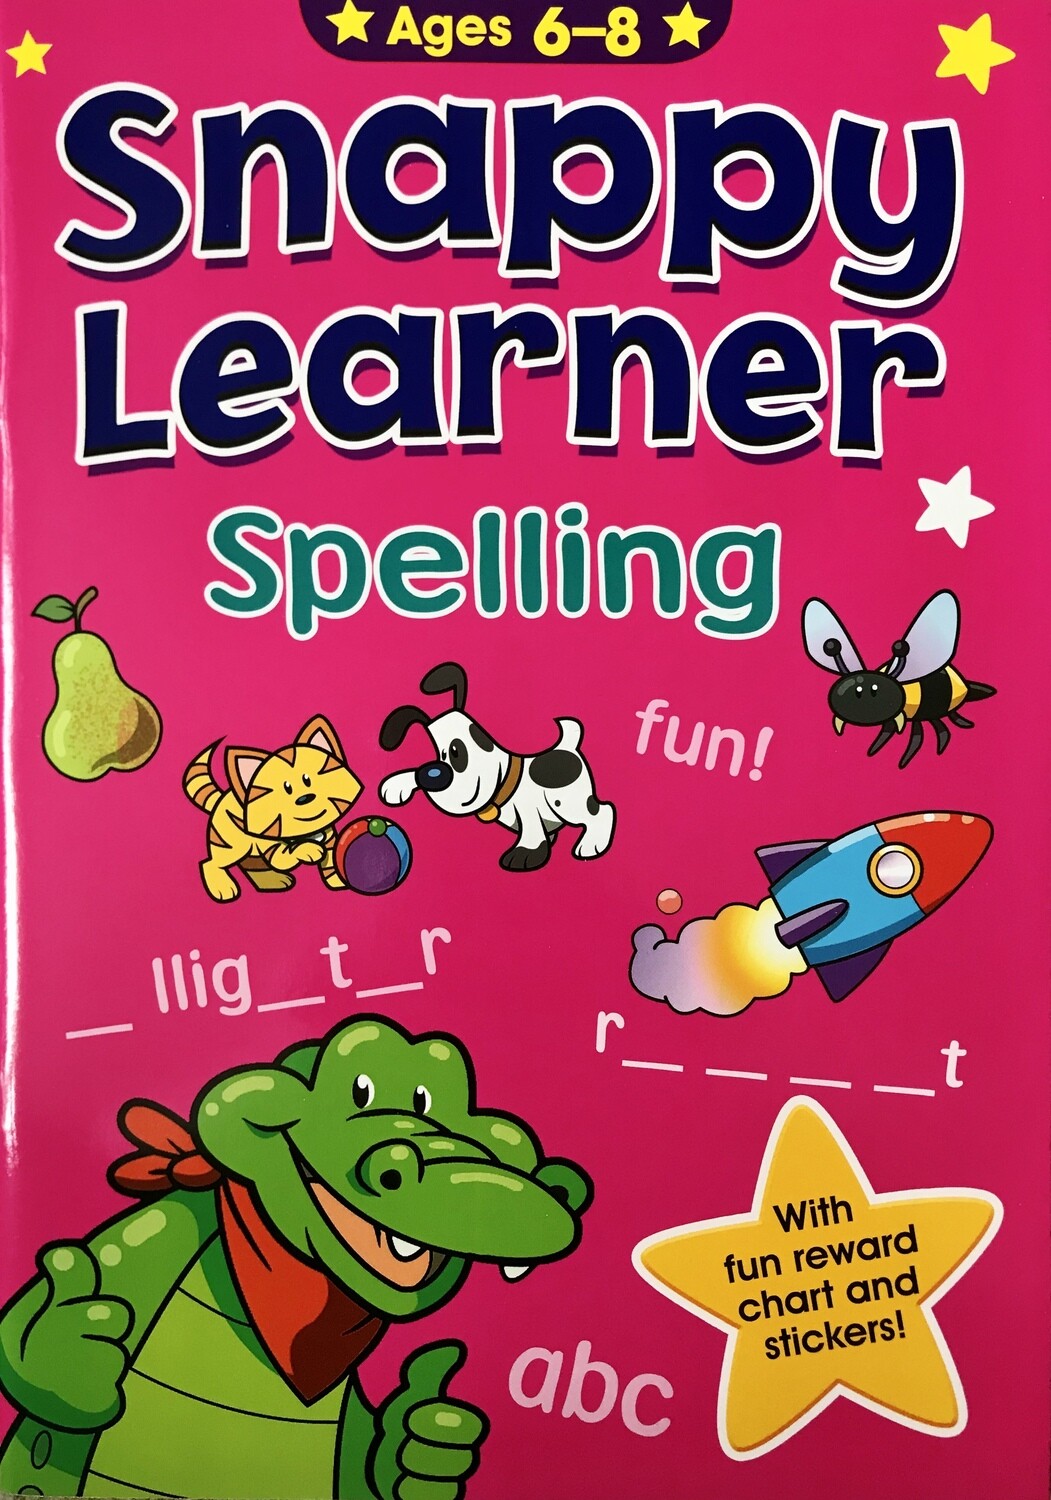 2 x Snappy Learner Educational Books 6-8 Year Olds maths Adding Multiplying 